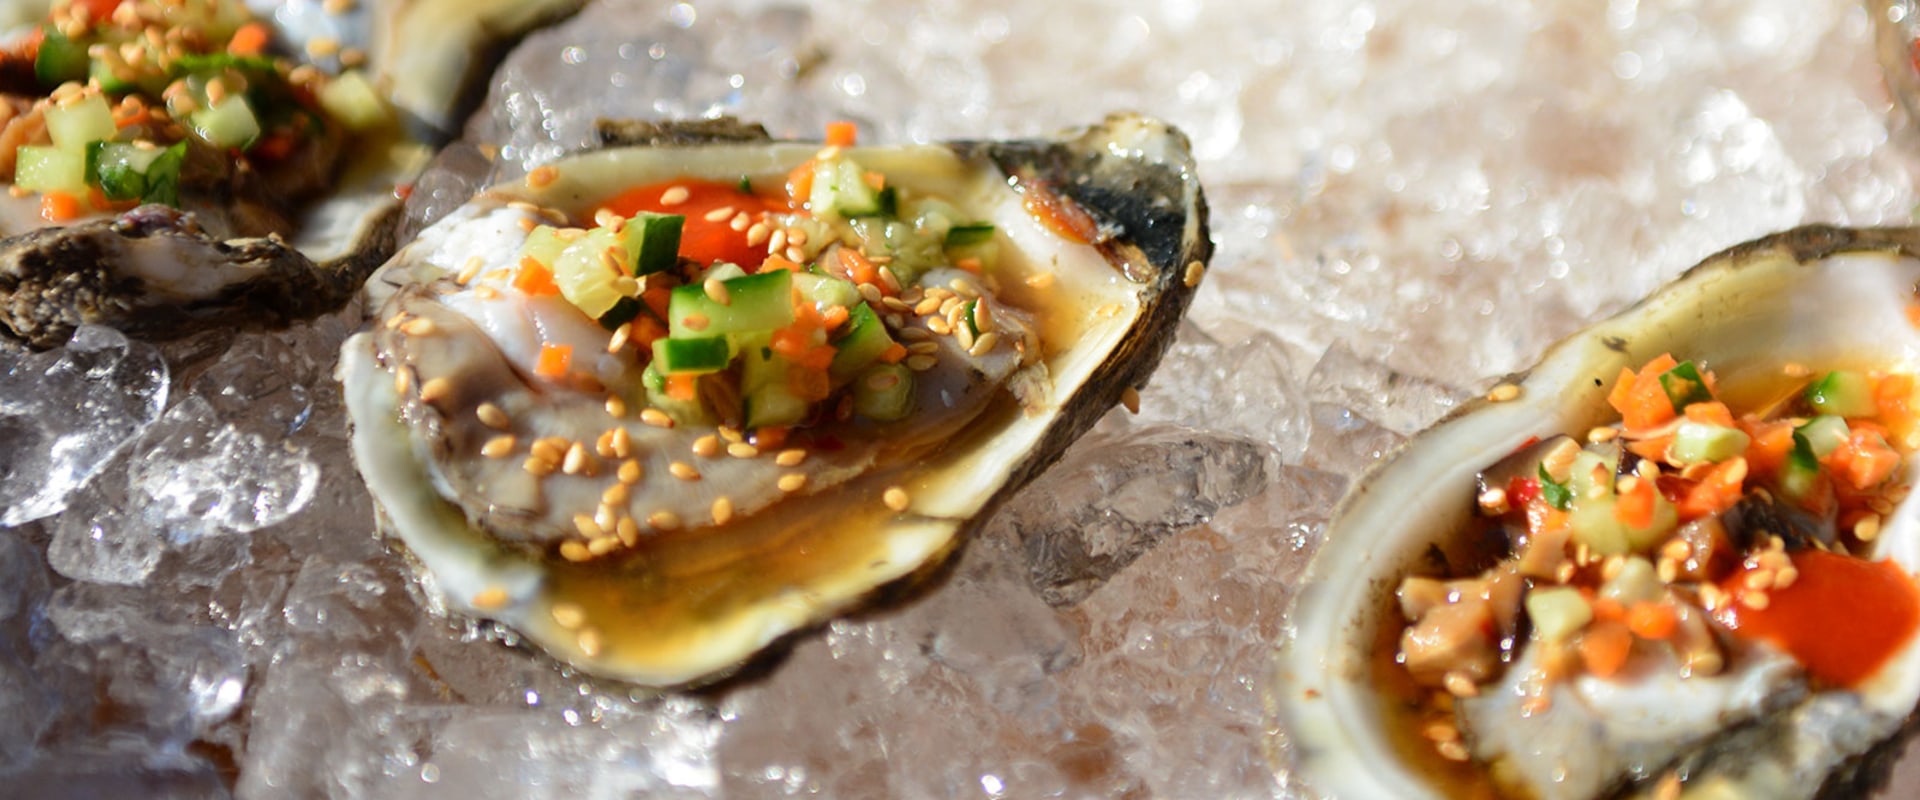 Unique Oyster Events and Festivals in Fairhope, Alabama